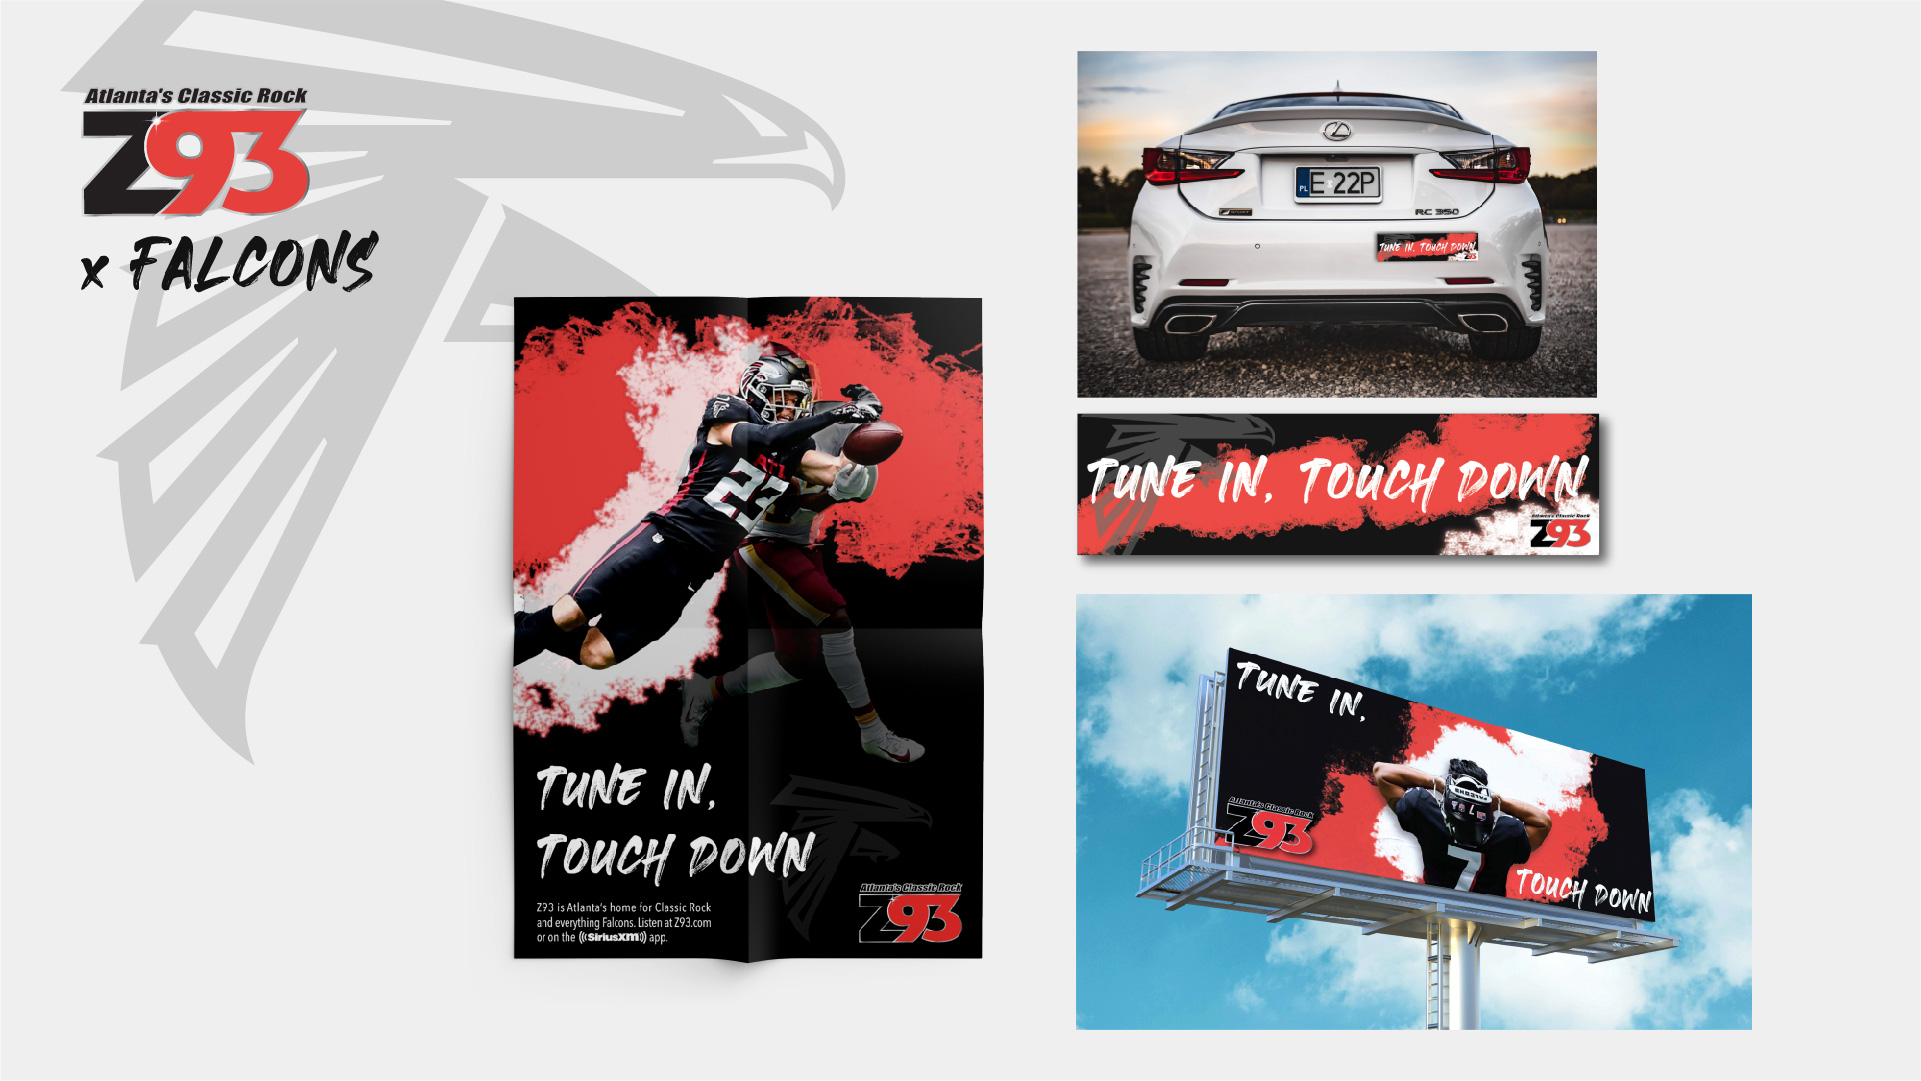  / “Z93 x Falcons, Print Campaign,” print ads, various sizes, 2021. A print campaign for Z93, Atlanta’s classic rock station, advertising the message that they are the prime station for tuning into the Falcons’ football games.  